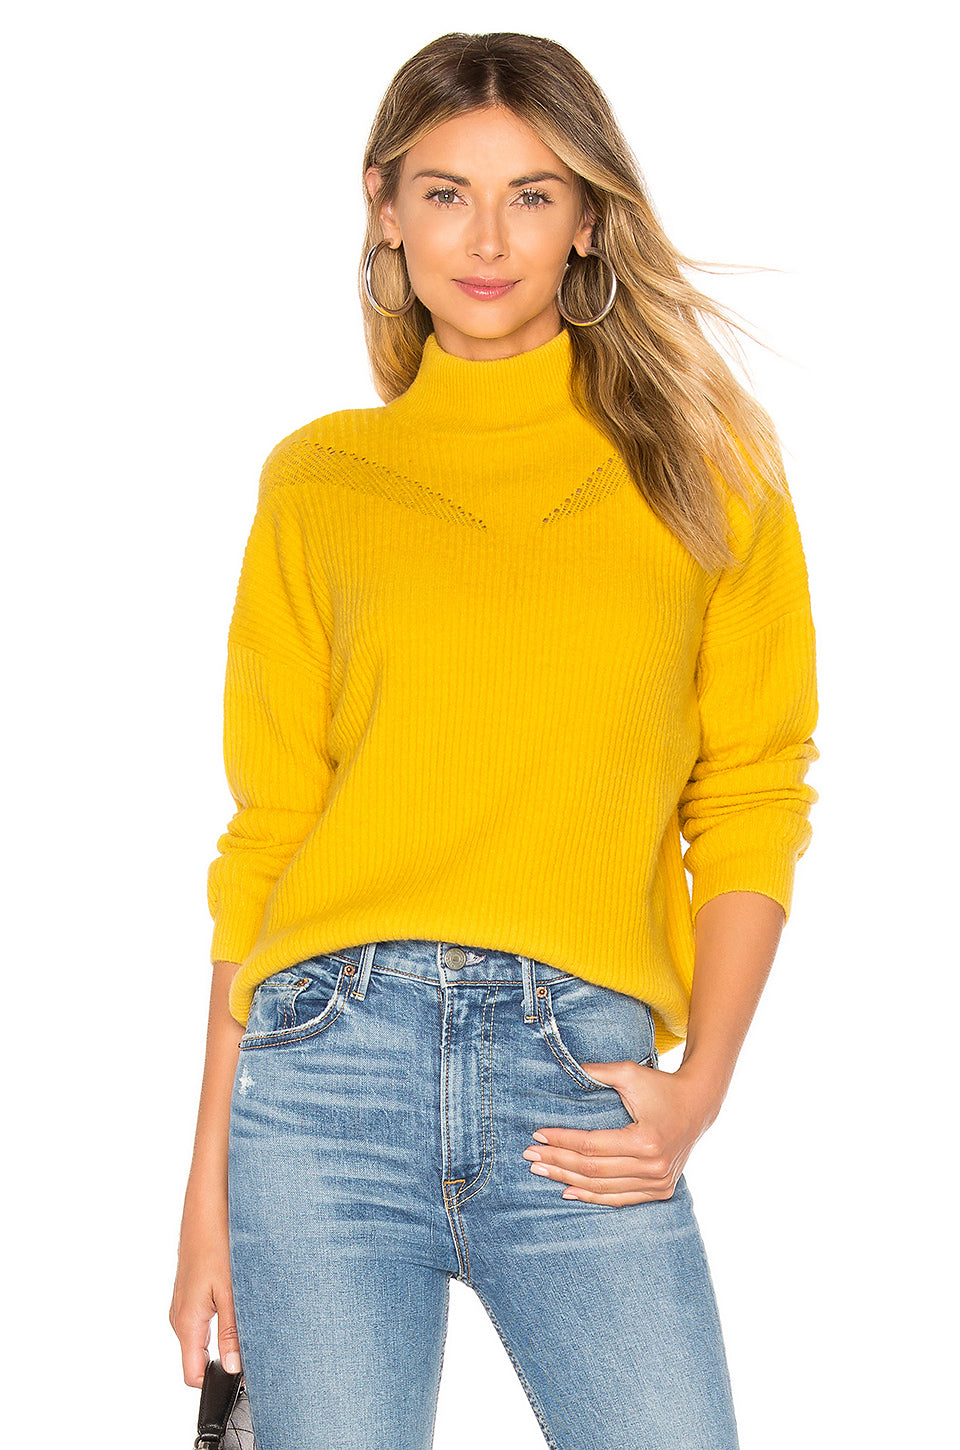 Escape Sweater in GOLDEN YELLOW